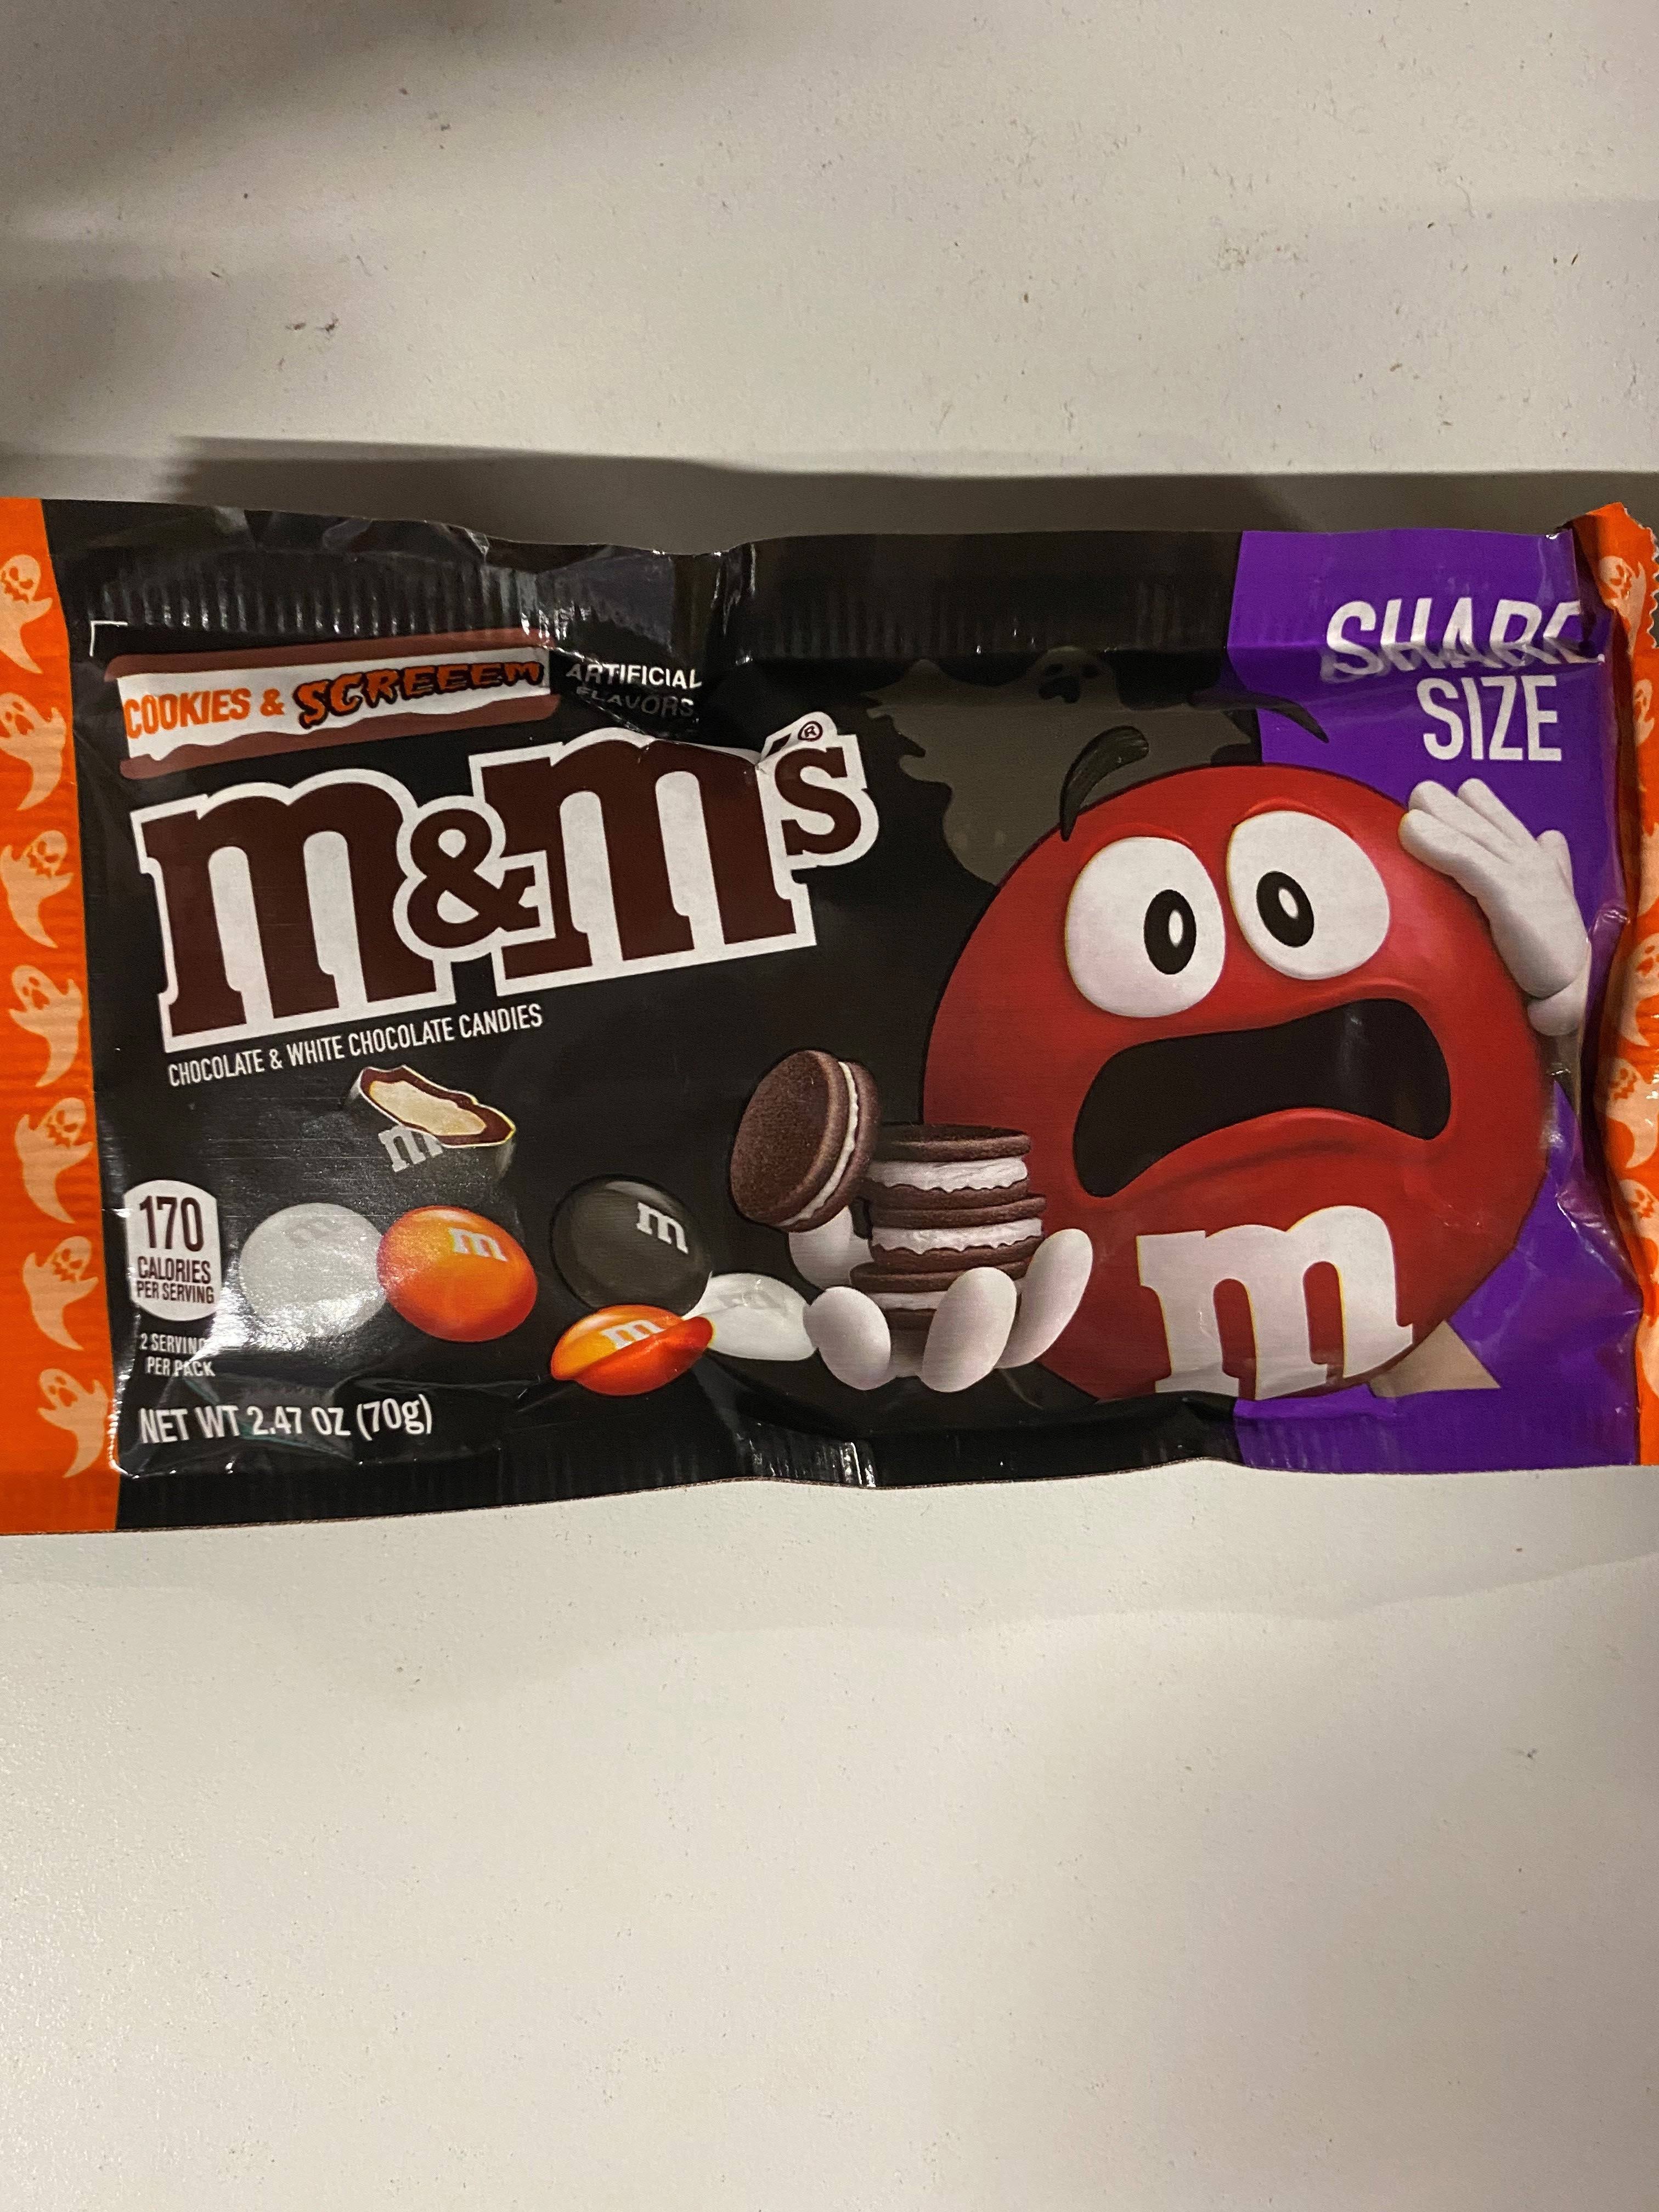 M&M's Cookies & Screem Chocolate Halloween Candy Share Size